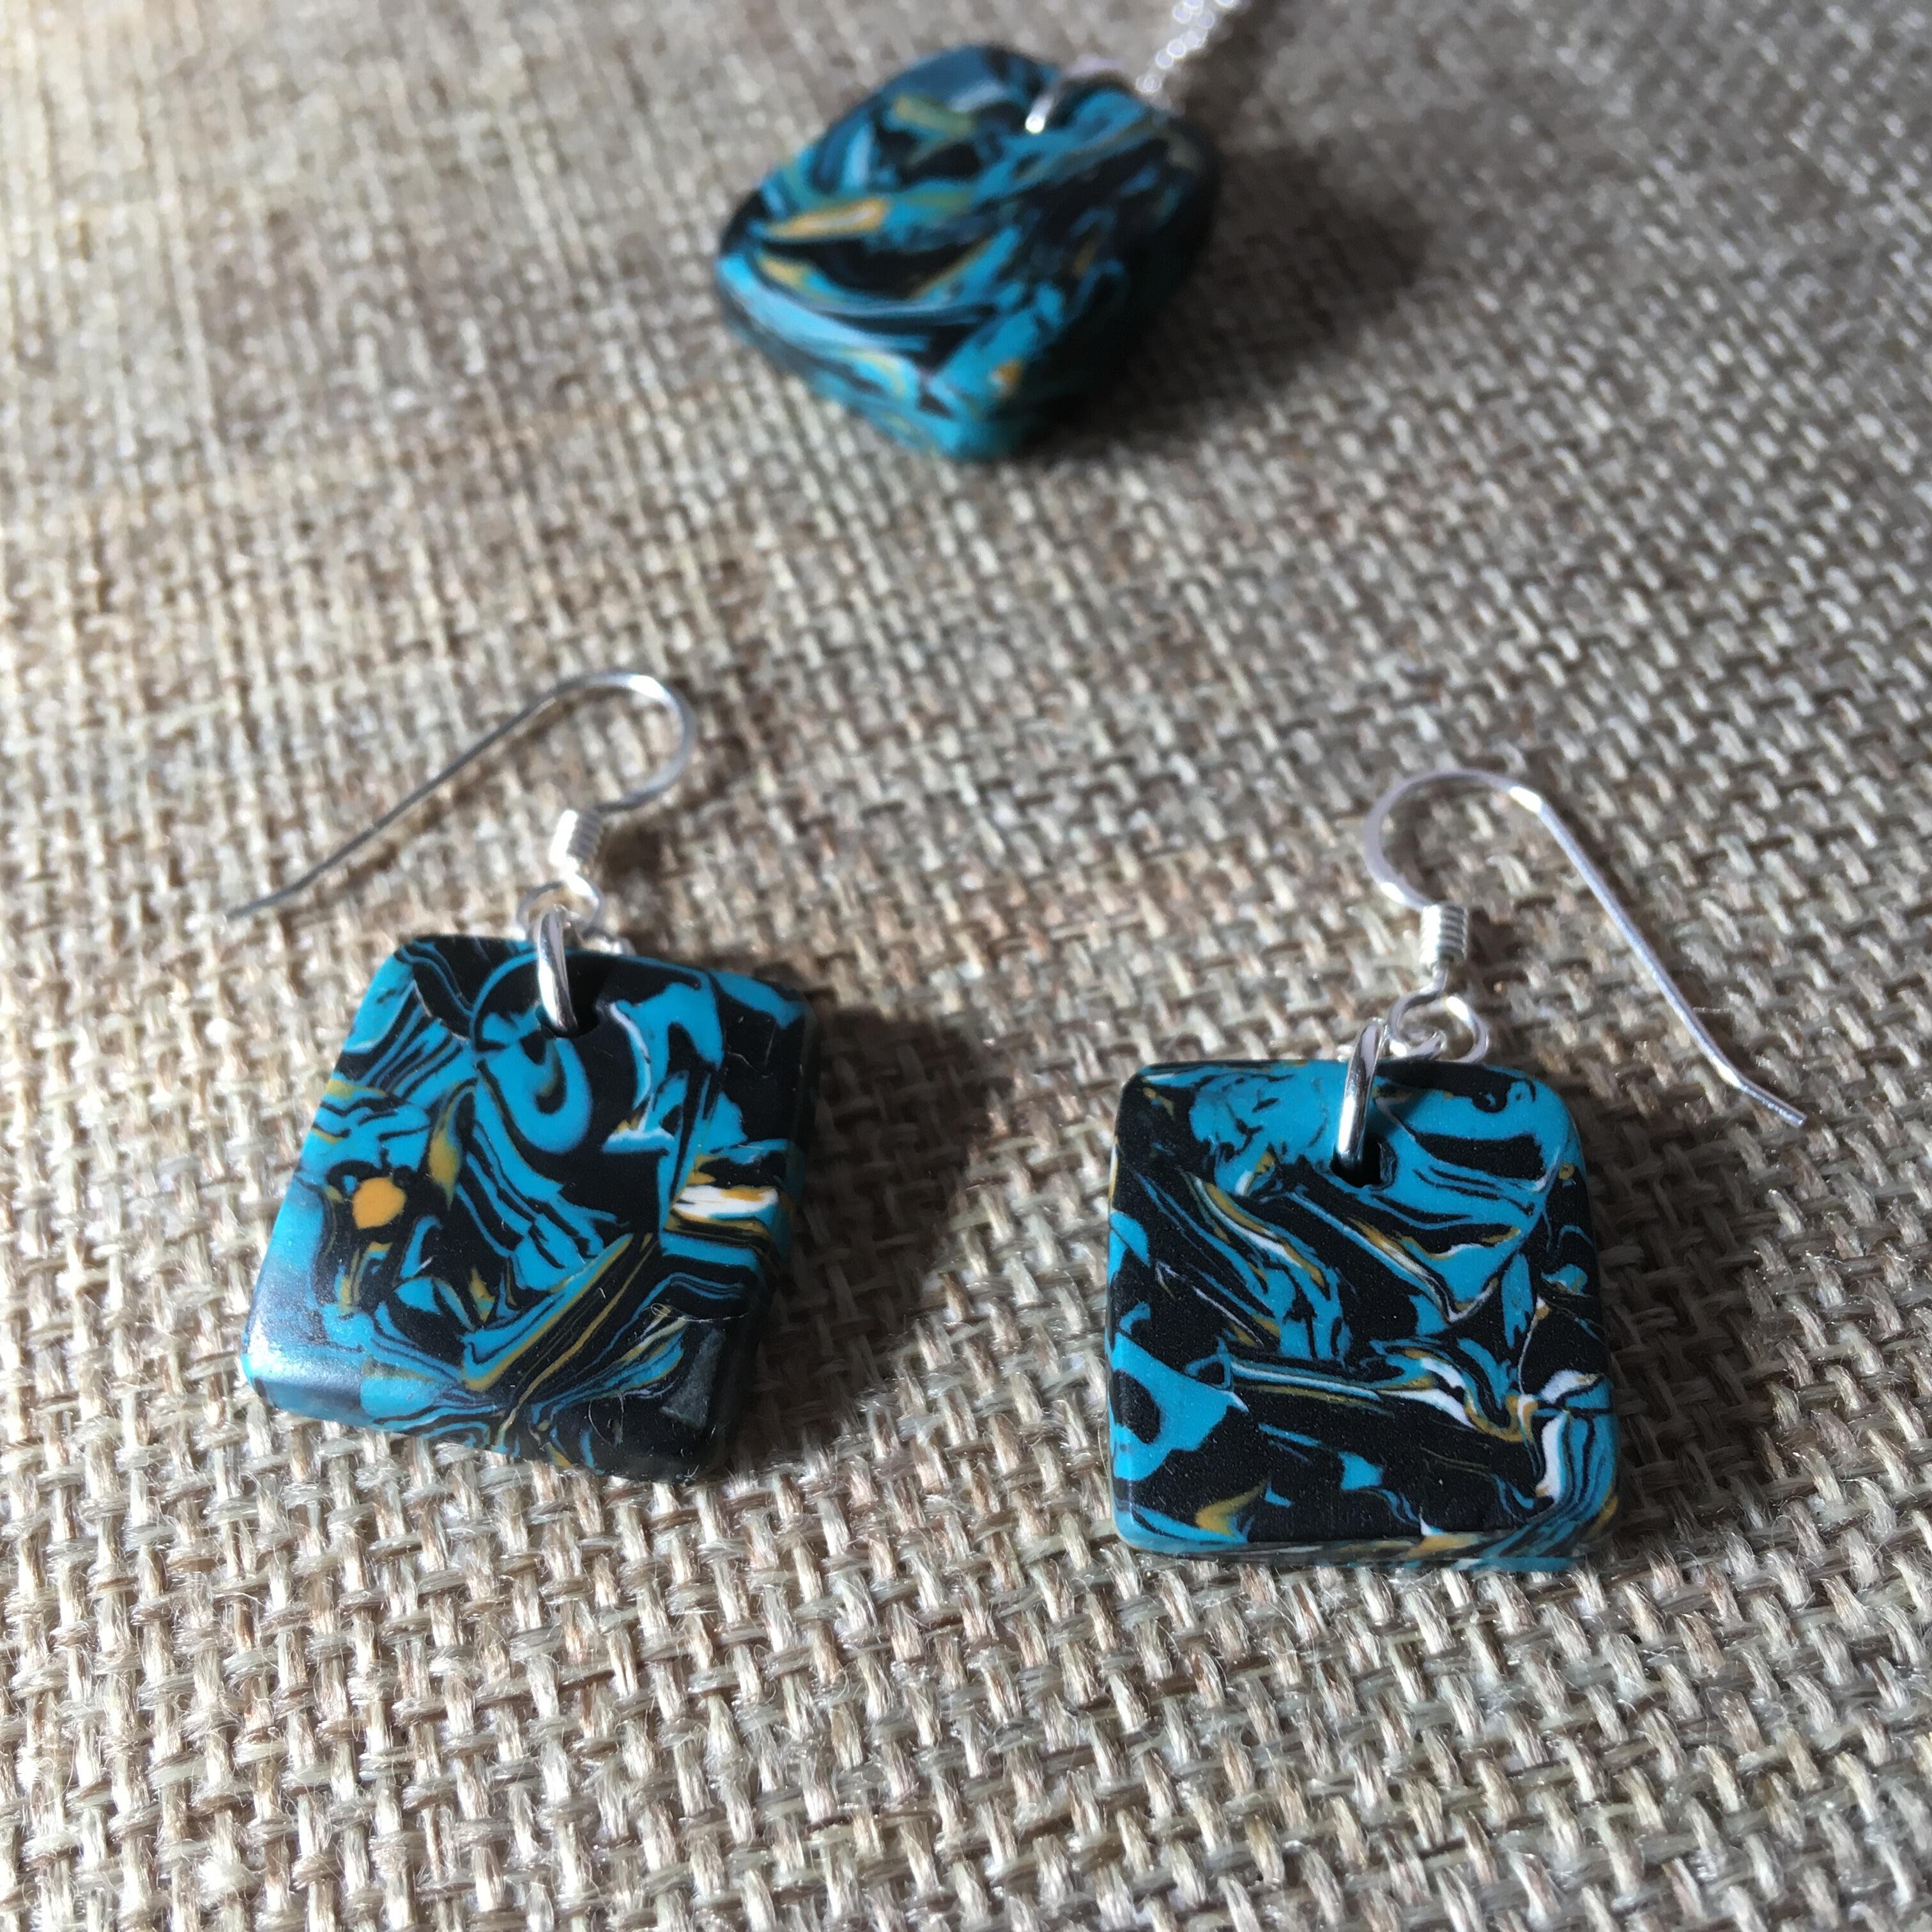 Handmade Polymer Clay Earrings - Turquoise Gem Dangles - Ready to